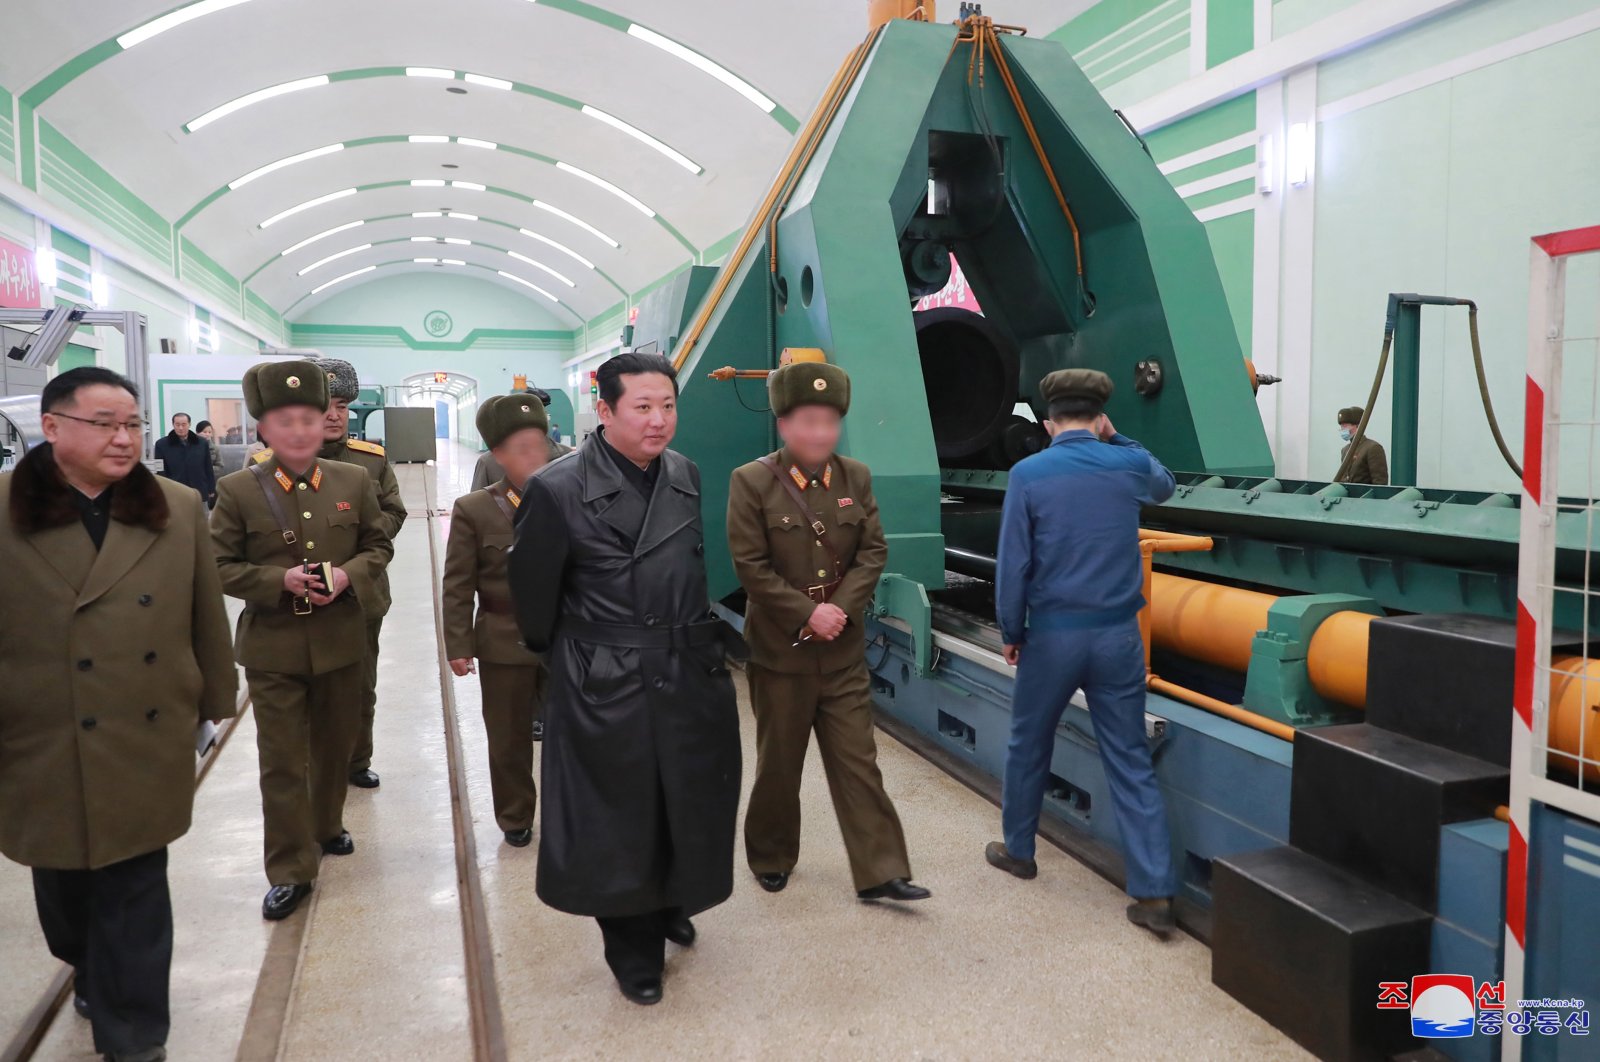 Chairperson of the North Korean State Affairs Committee, Kim Jong Un (C), during a visit to a munitions factory in the country that produces an &quot;important weapons system&quot; days after North Korea conducted tests to reveal its new missiles in this photo released on Jan. 28, 2022. (Reuters File Photo)